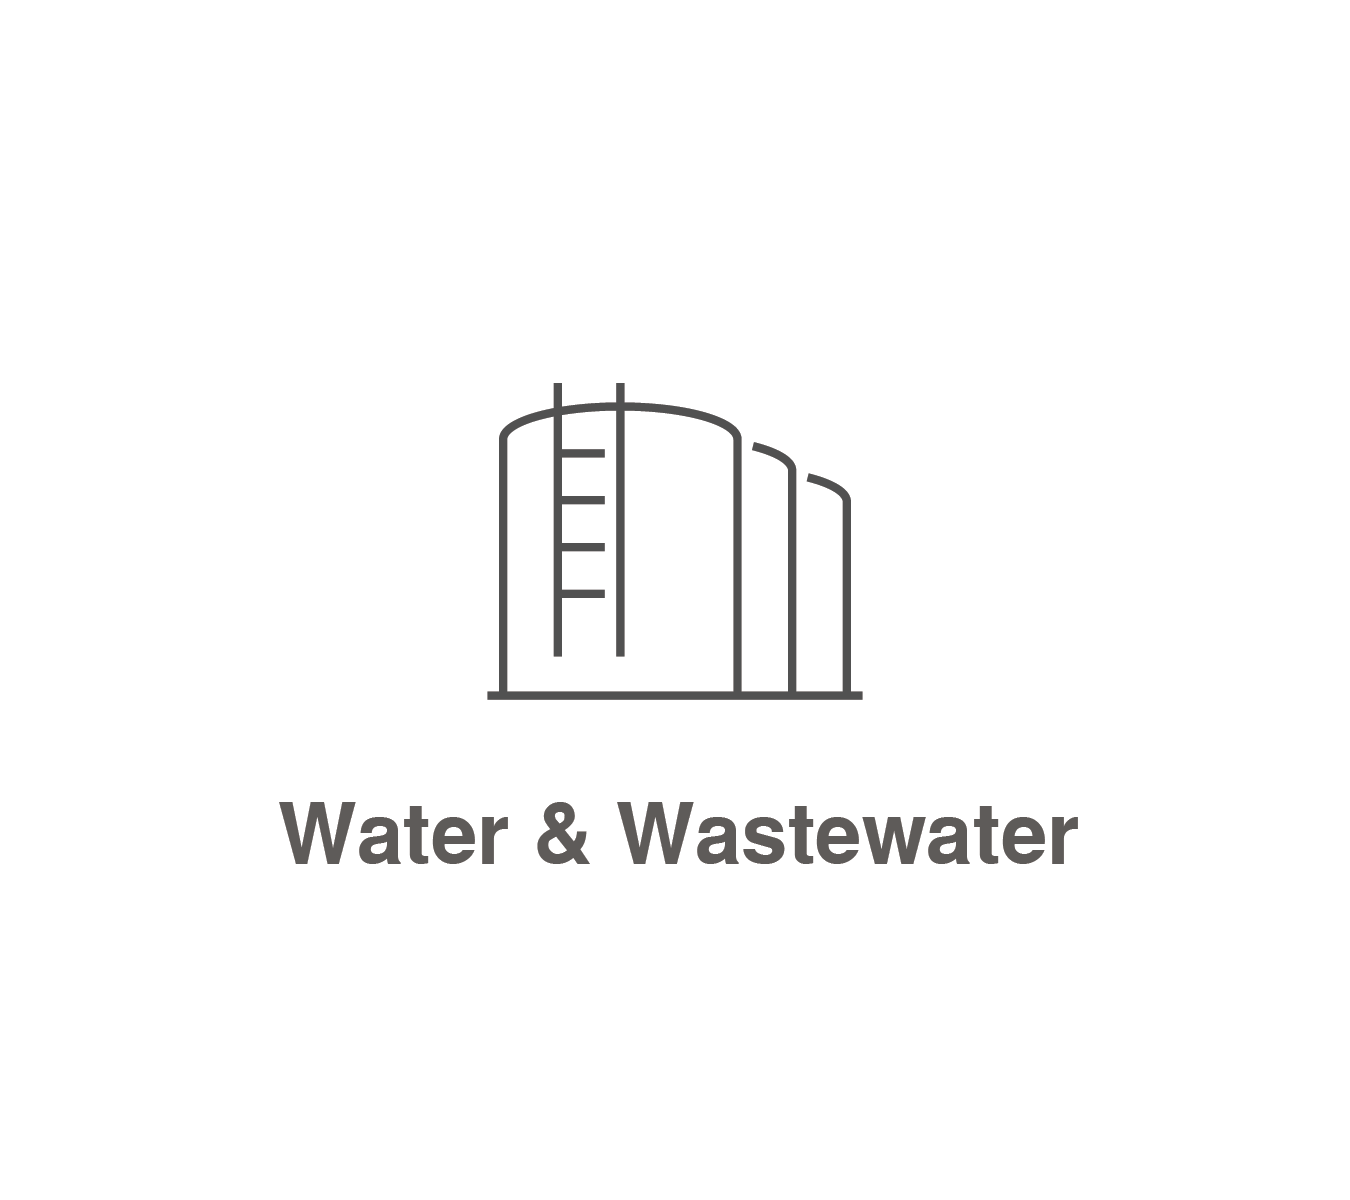 Wastewater Logo - Reliability for Water & Wastewater